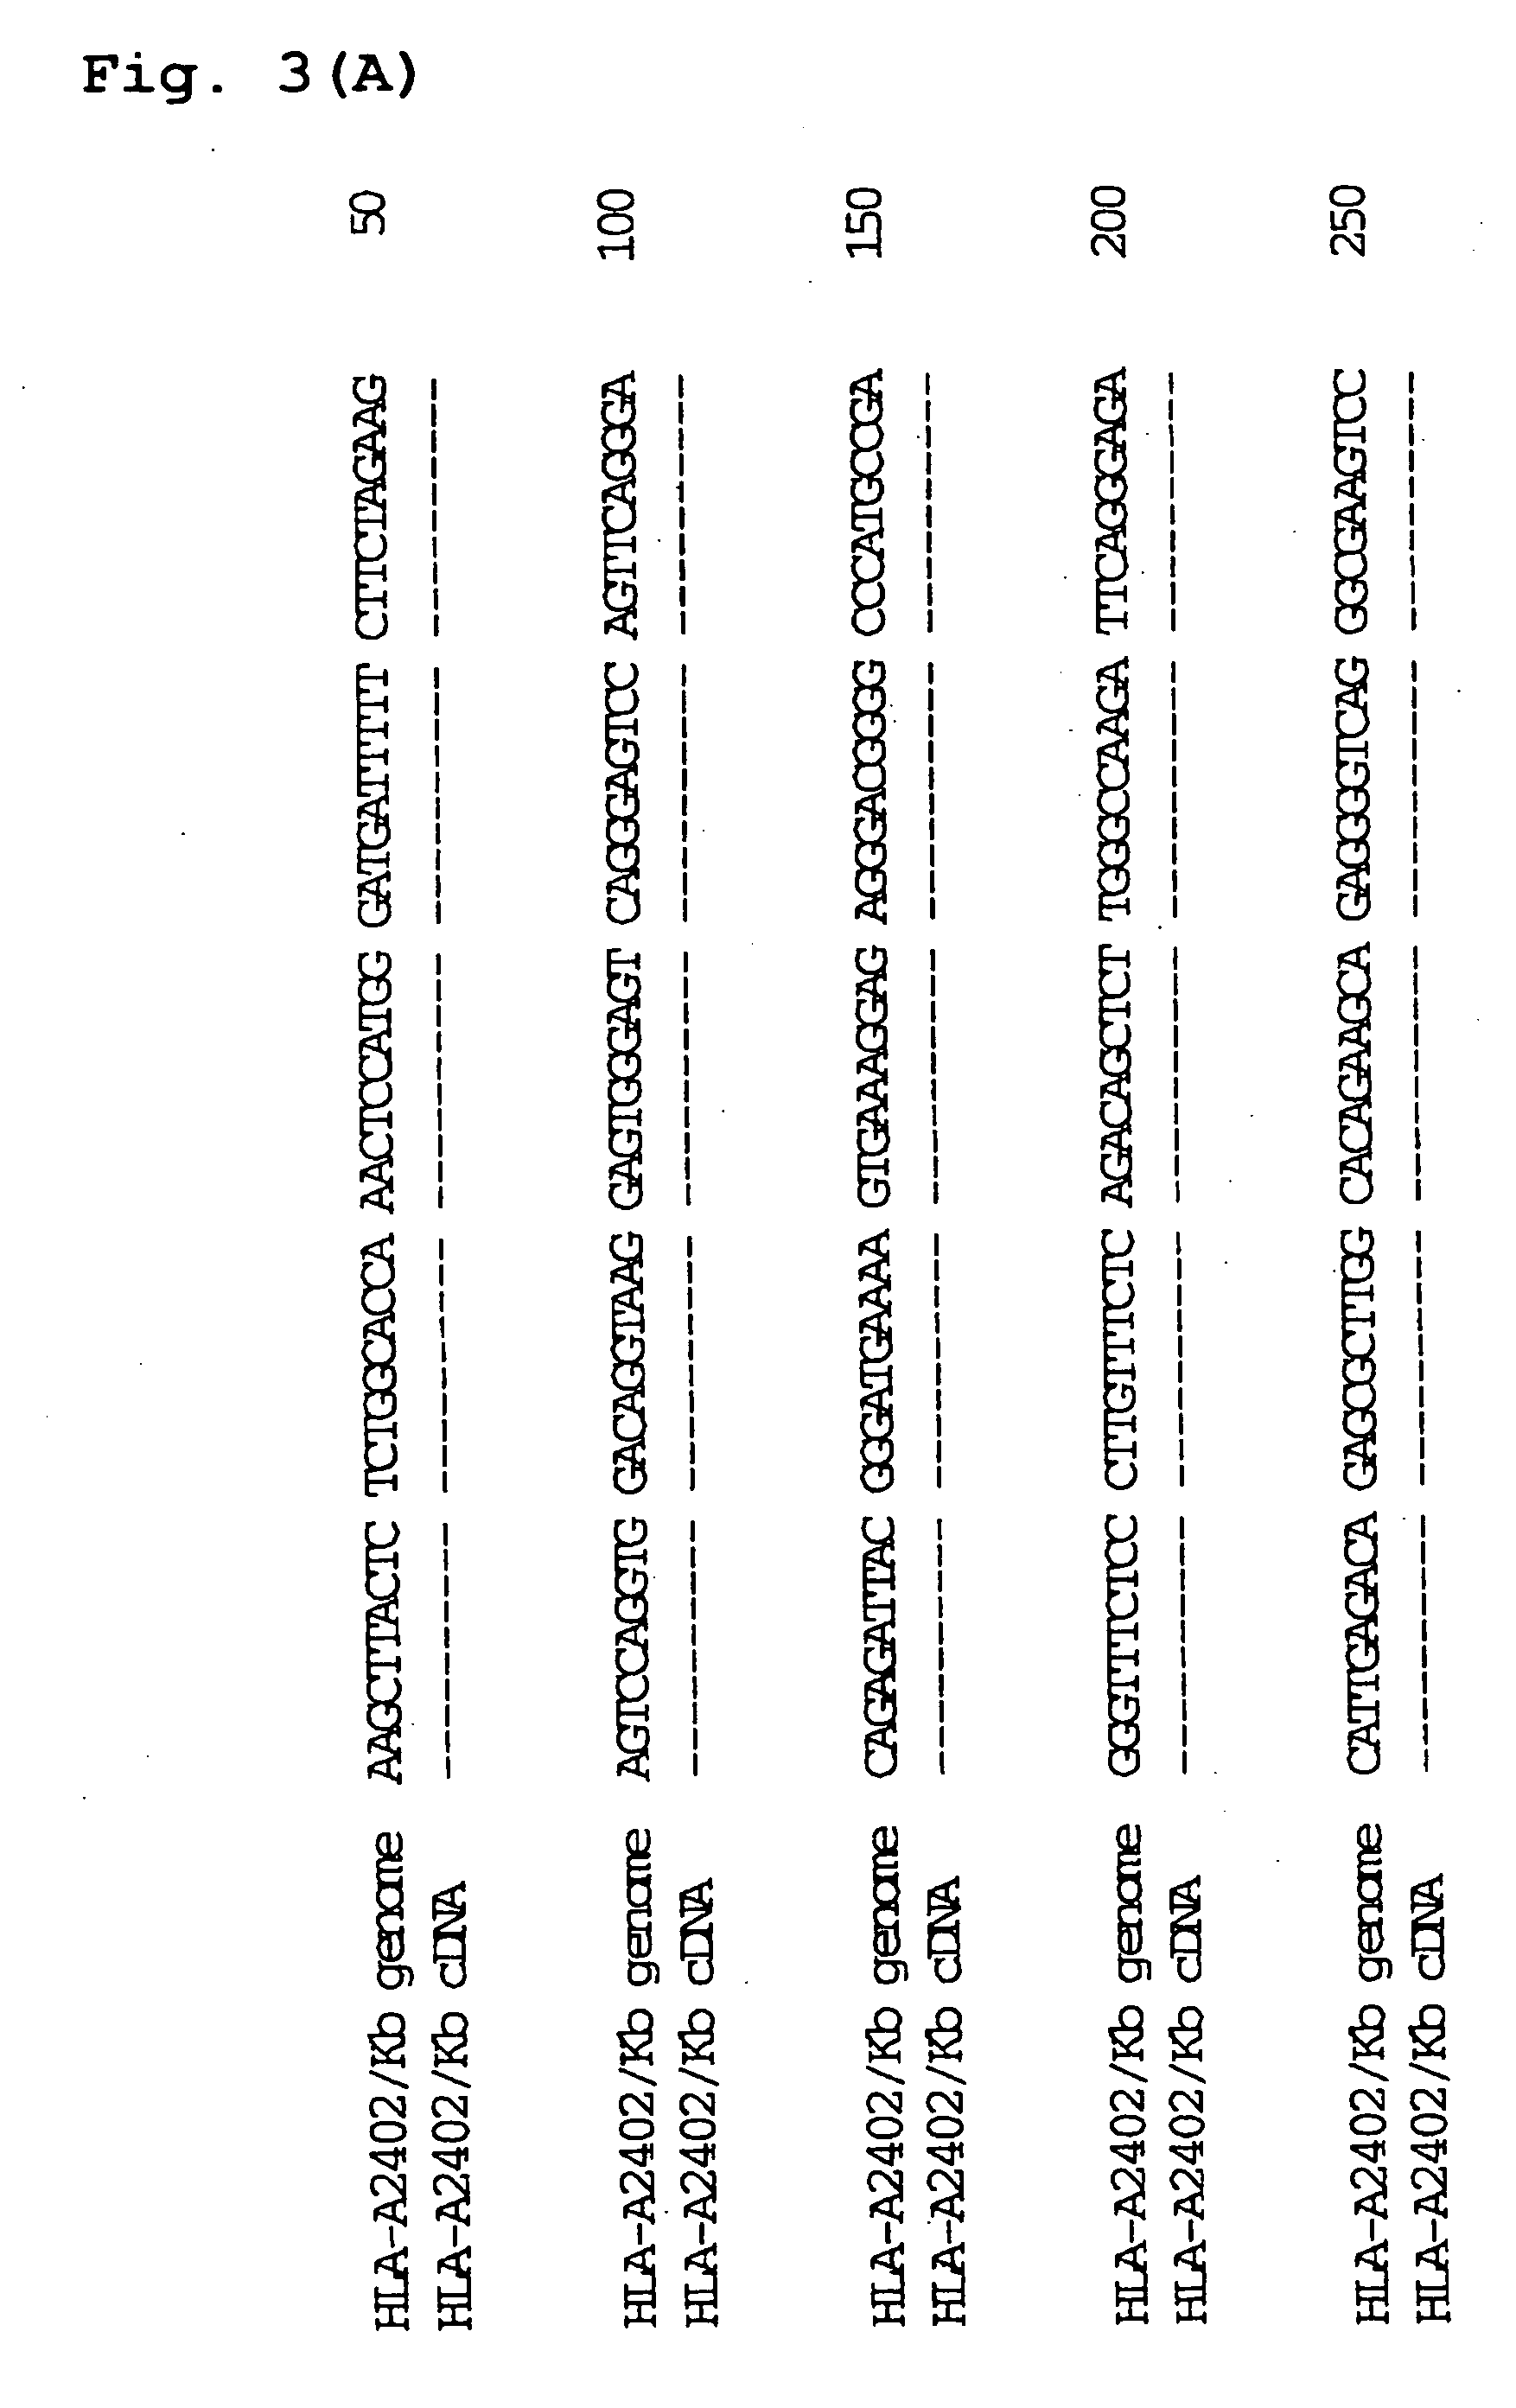 Transgenic animal expressing HLA-A24 and utilization thereof